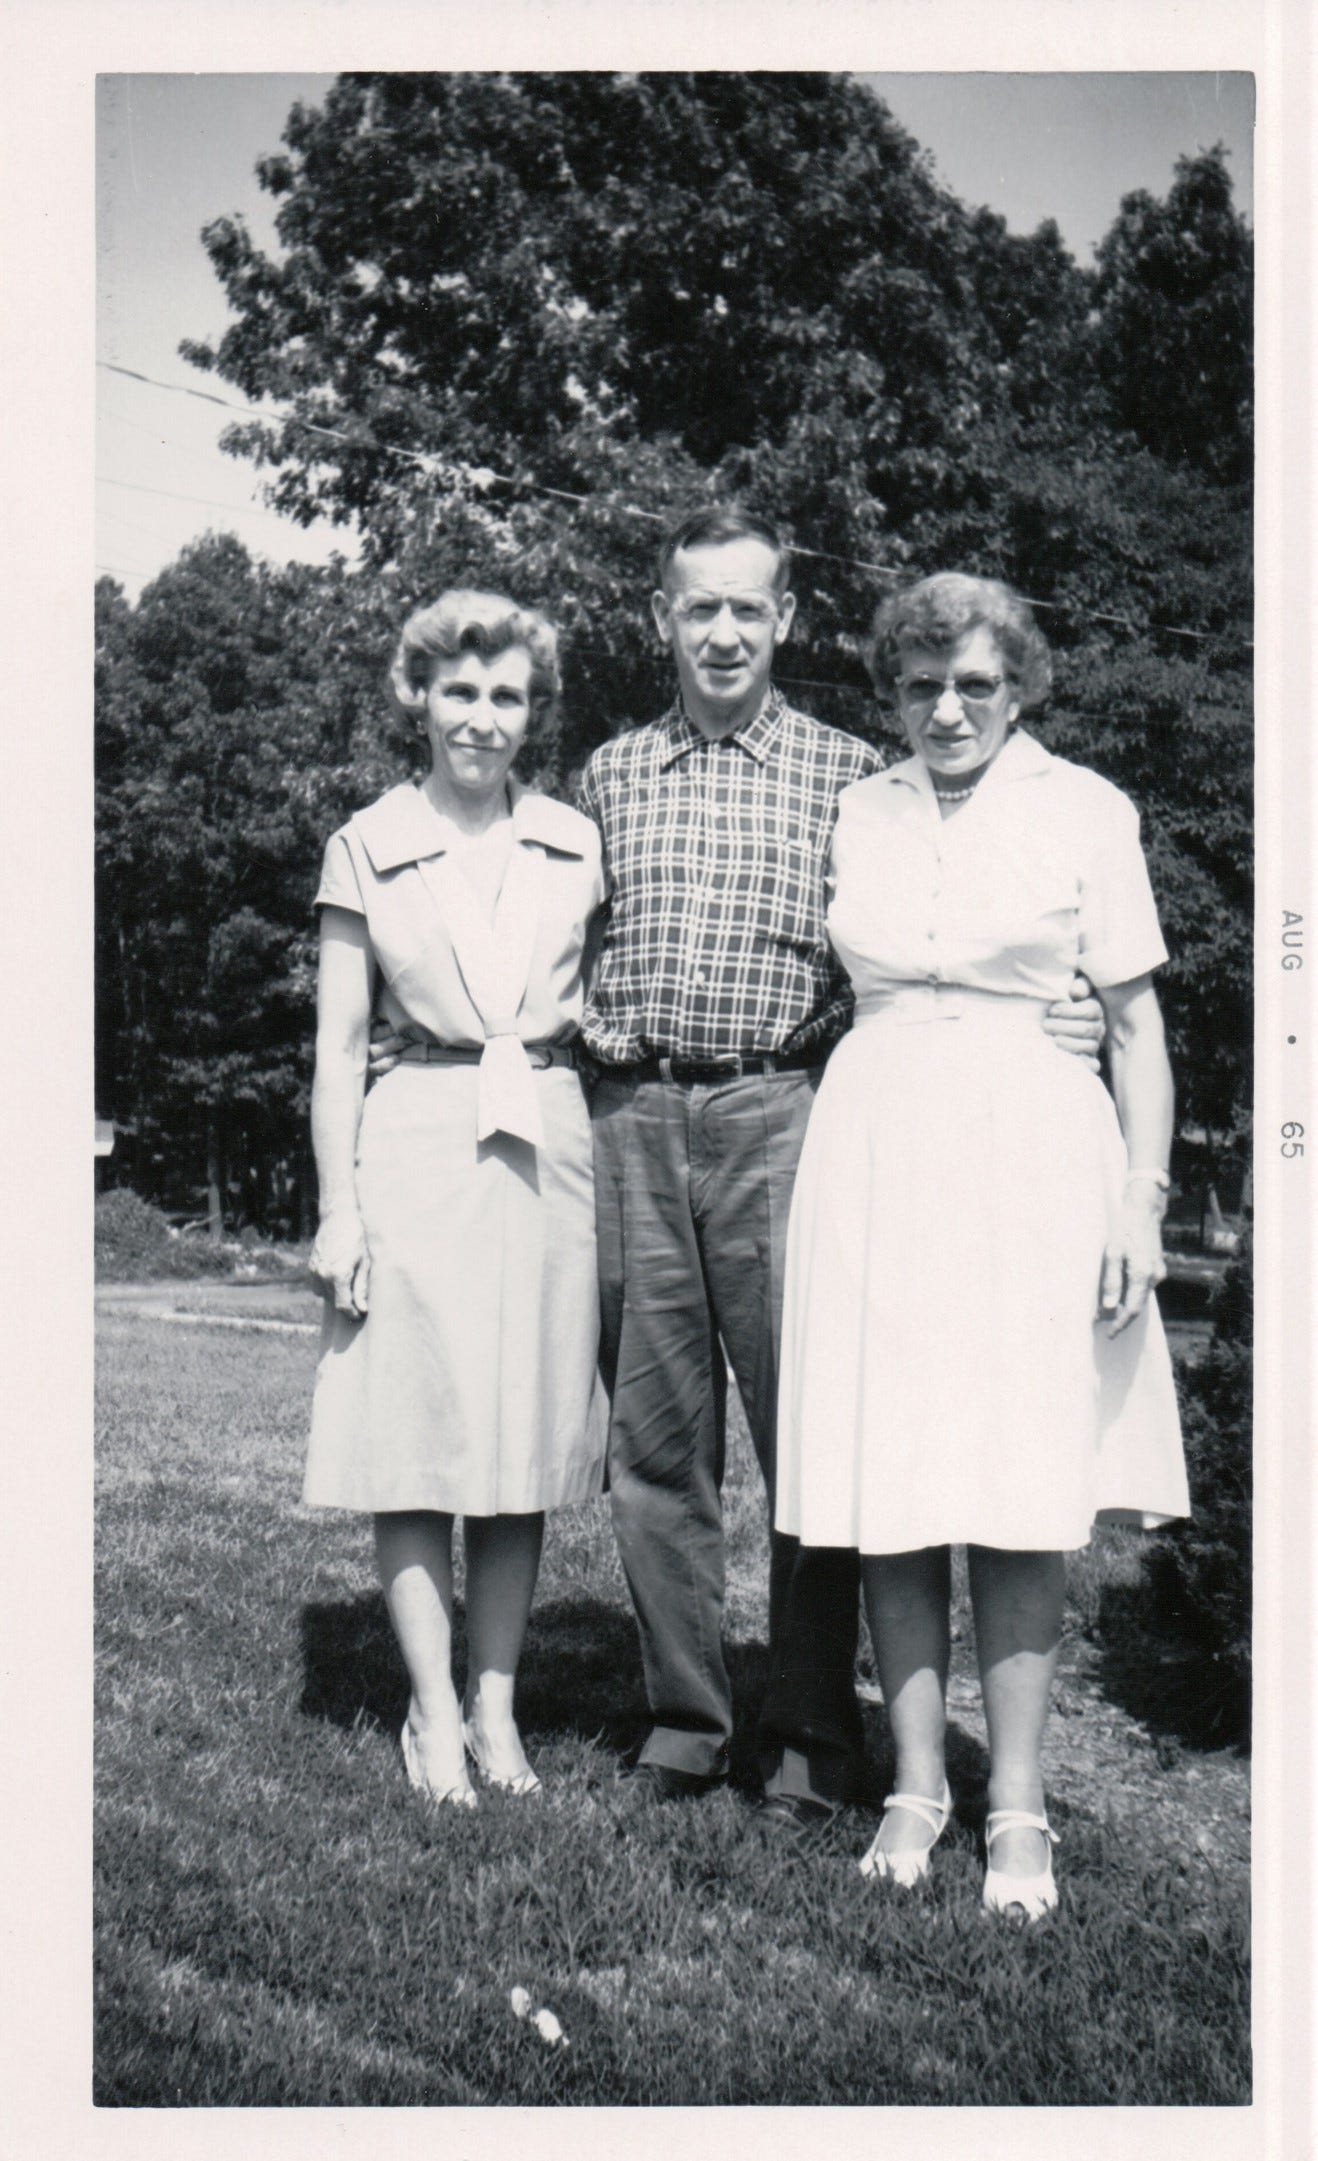 Two woman in casual dresses and dress shoes, and a man in a plaid shirt and dress pants posing for a photo outside